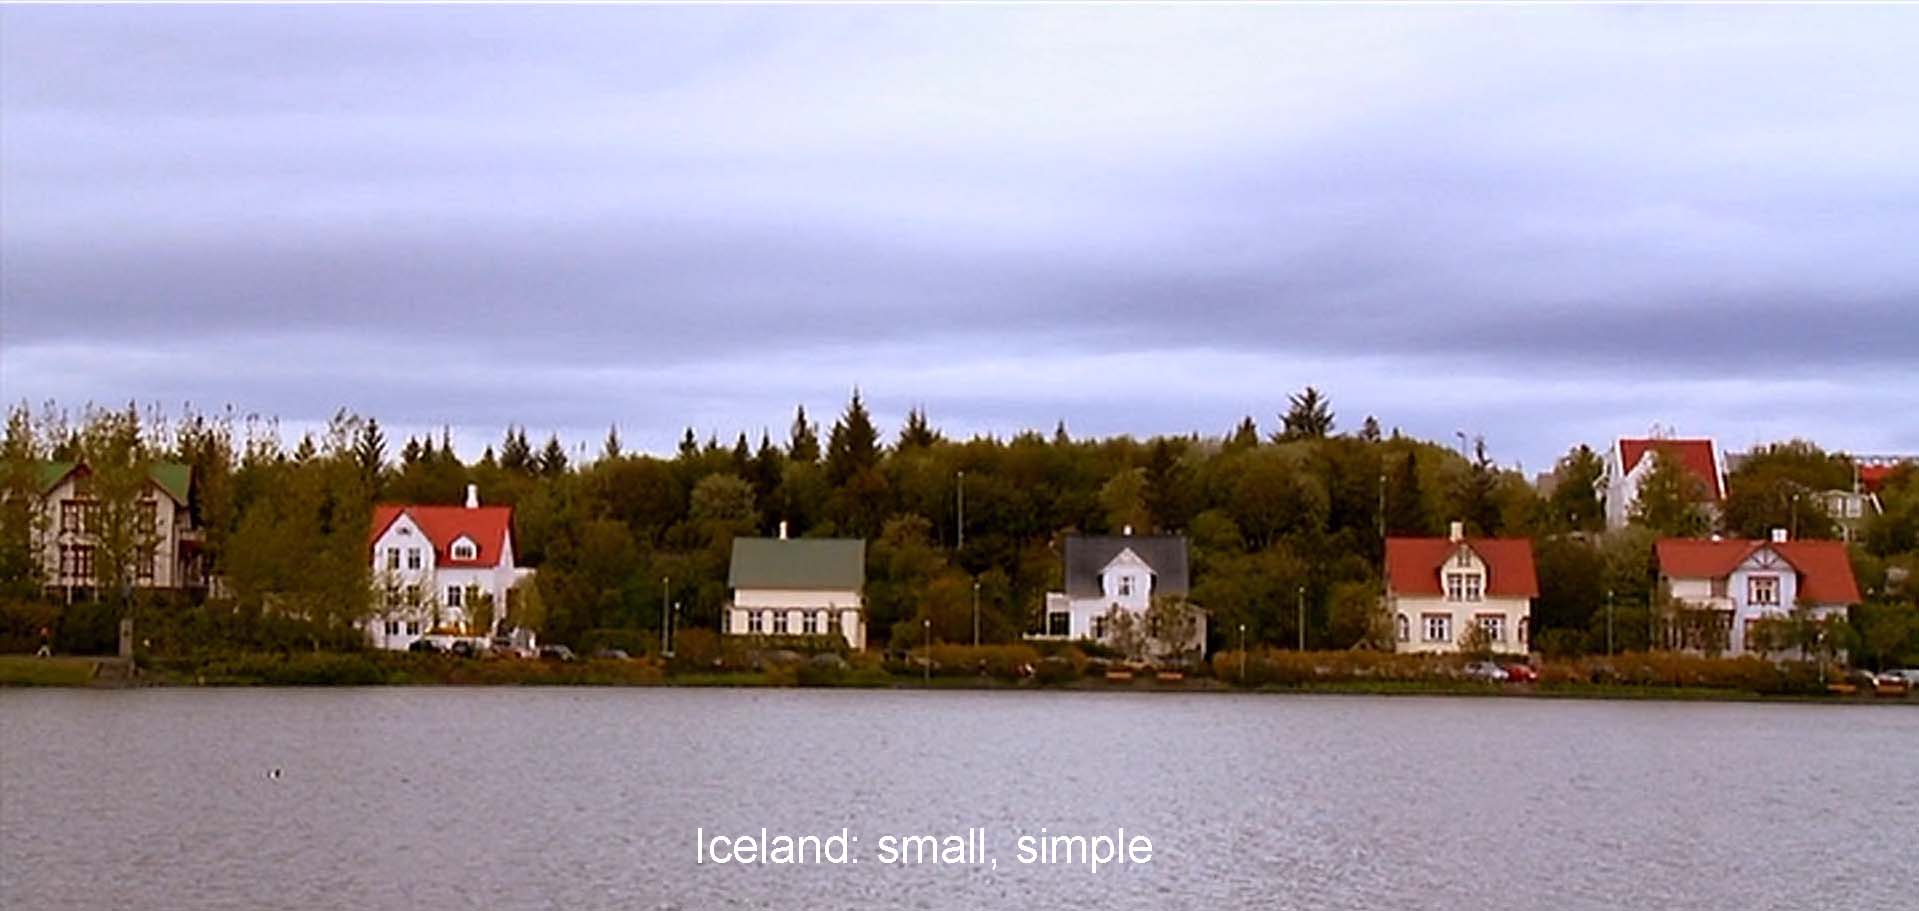 Iceland: small, simple